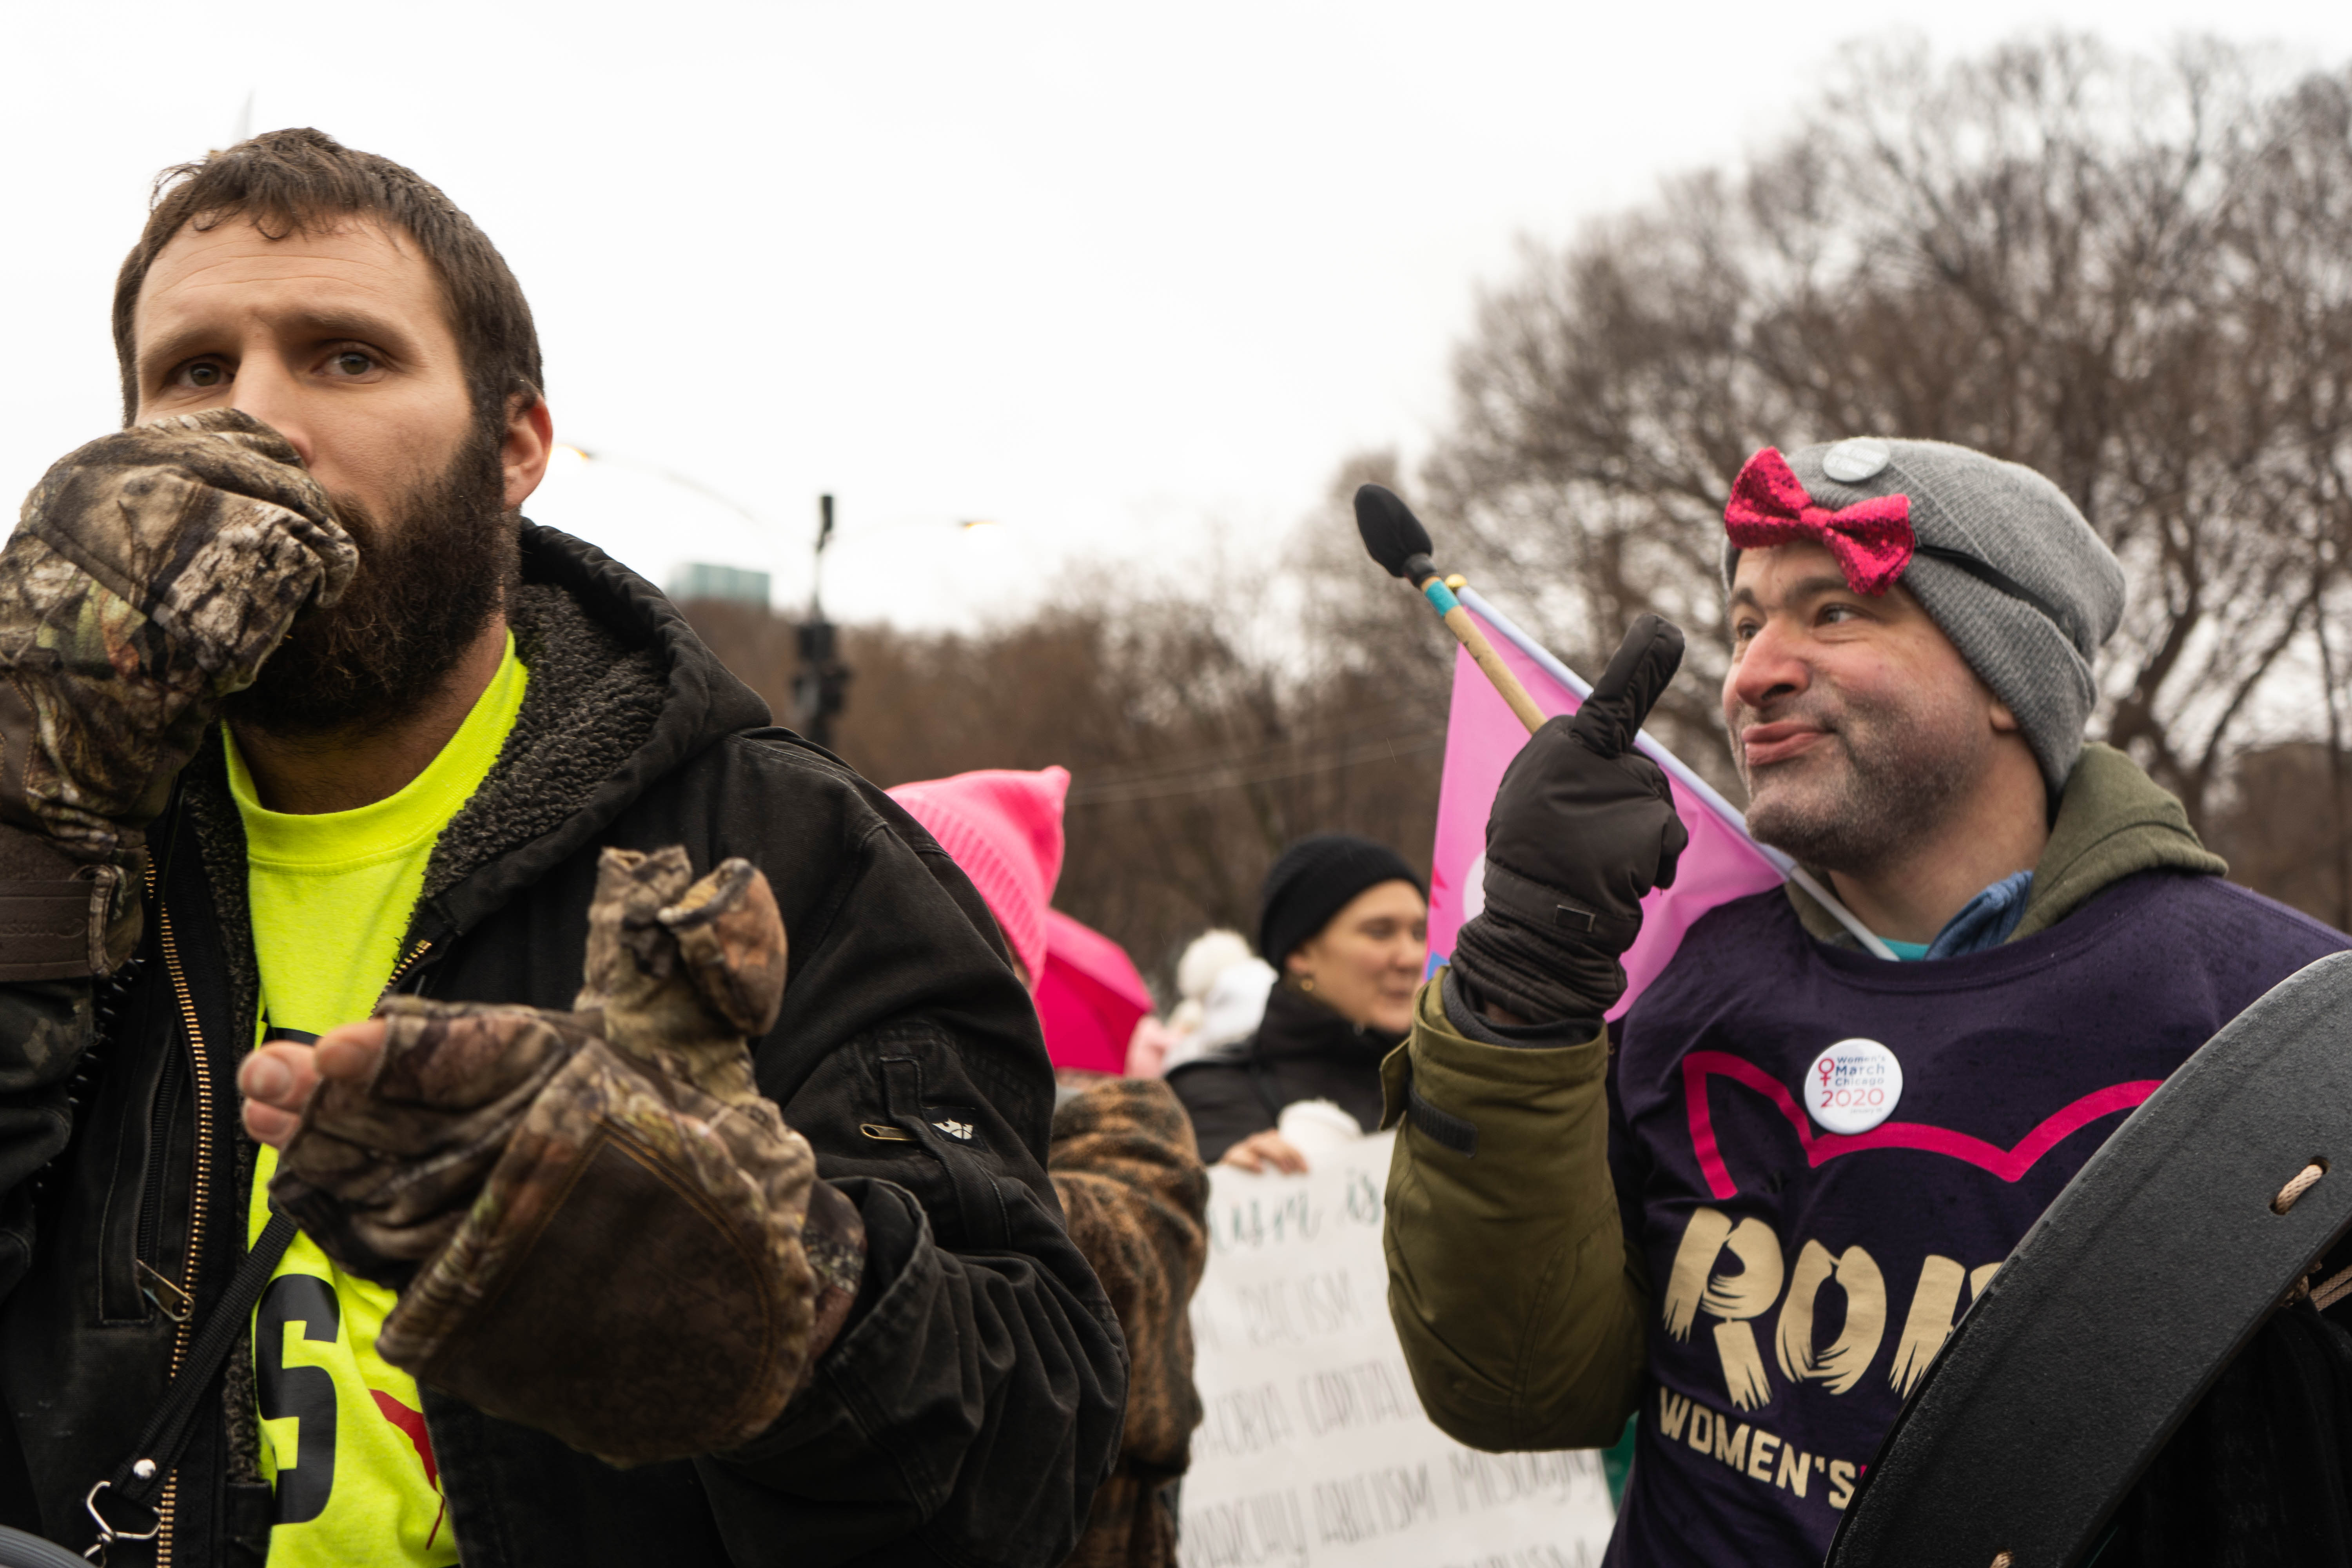 A women's march protester flips the protesting conservative the middle finger.